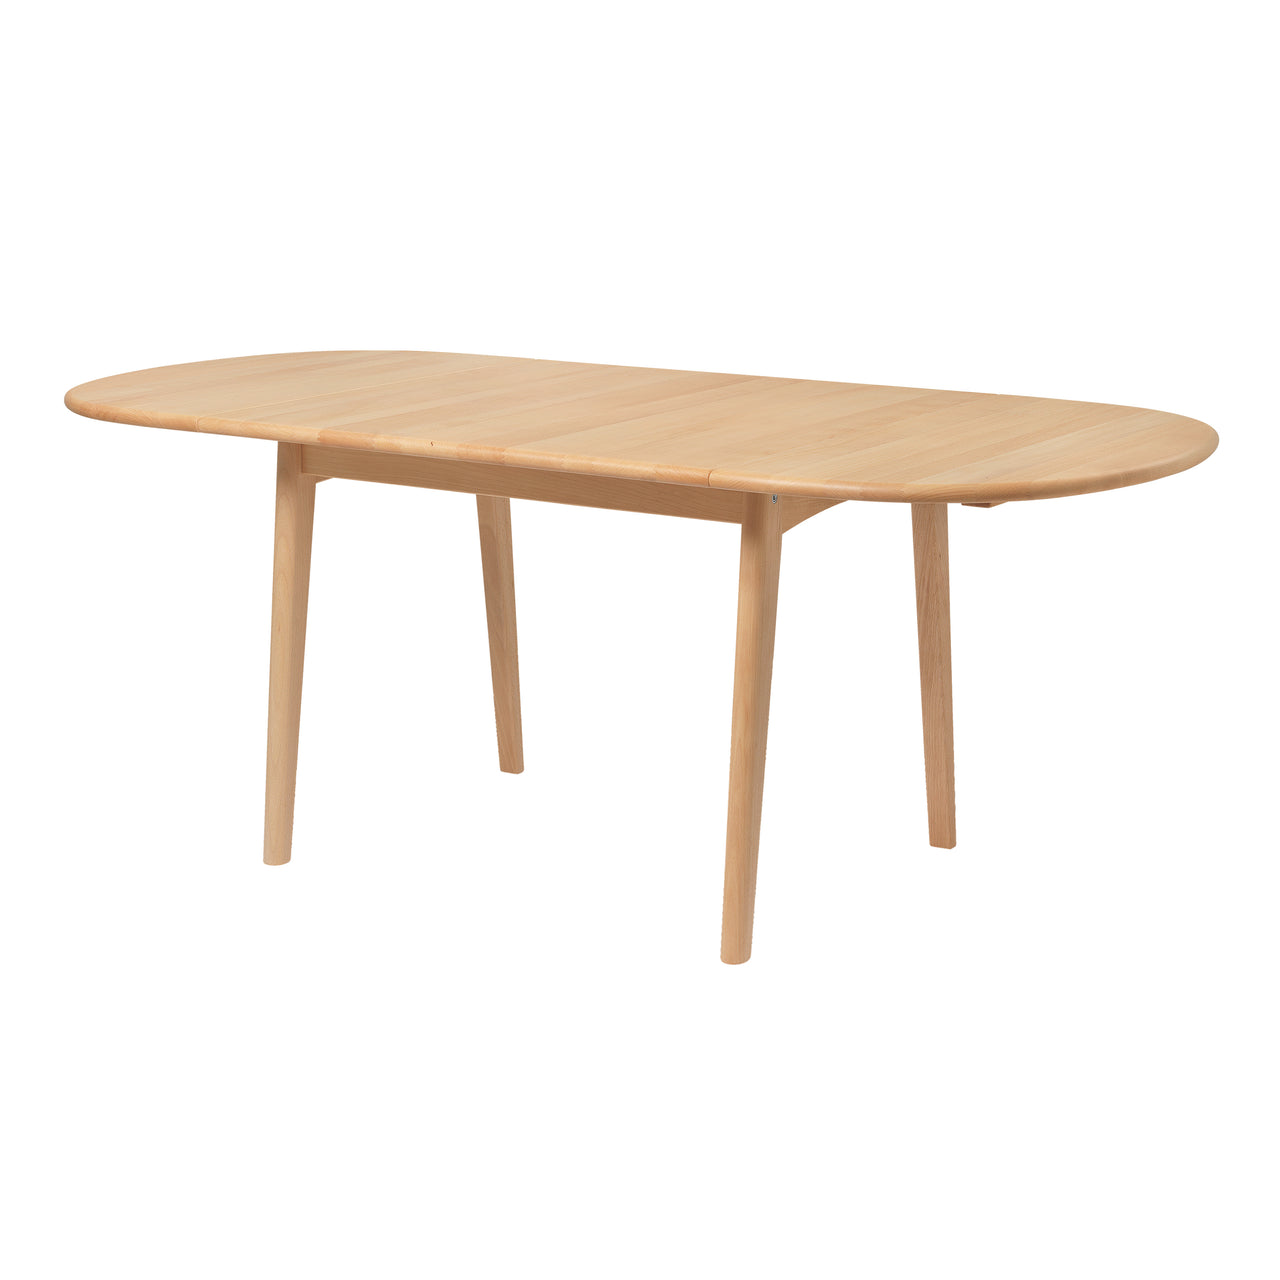 CH002 Dining Table: Oiled Beech